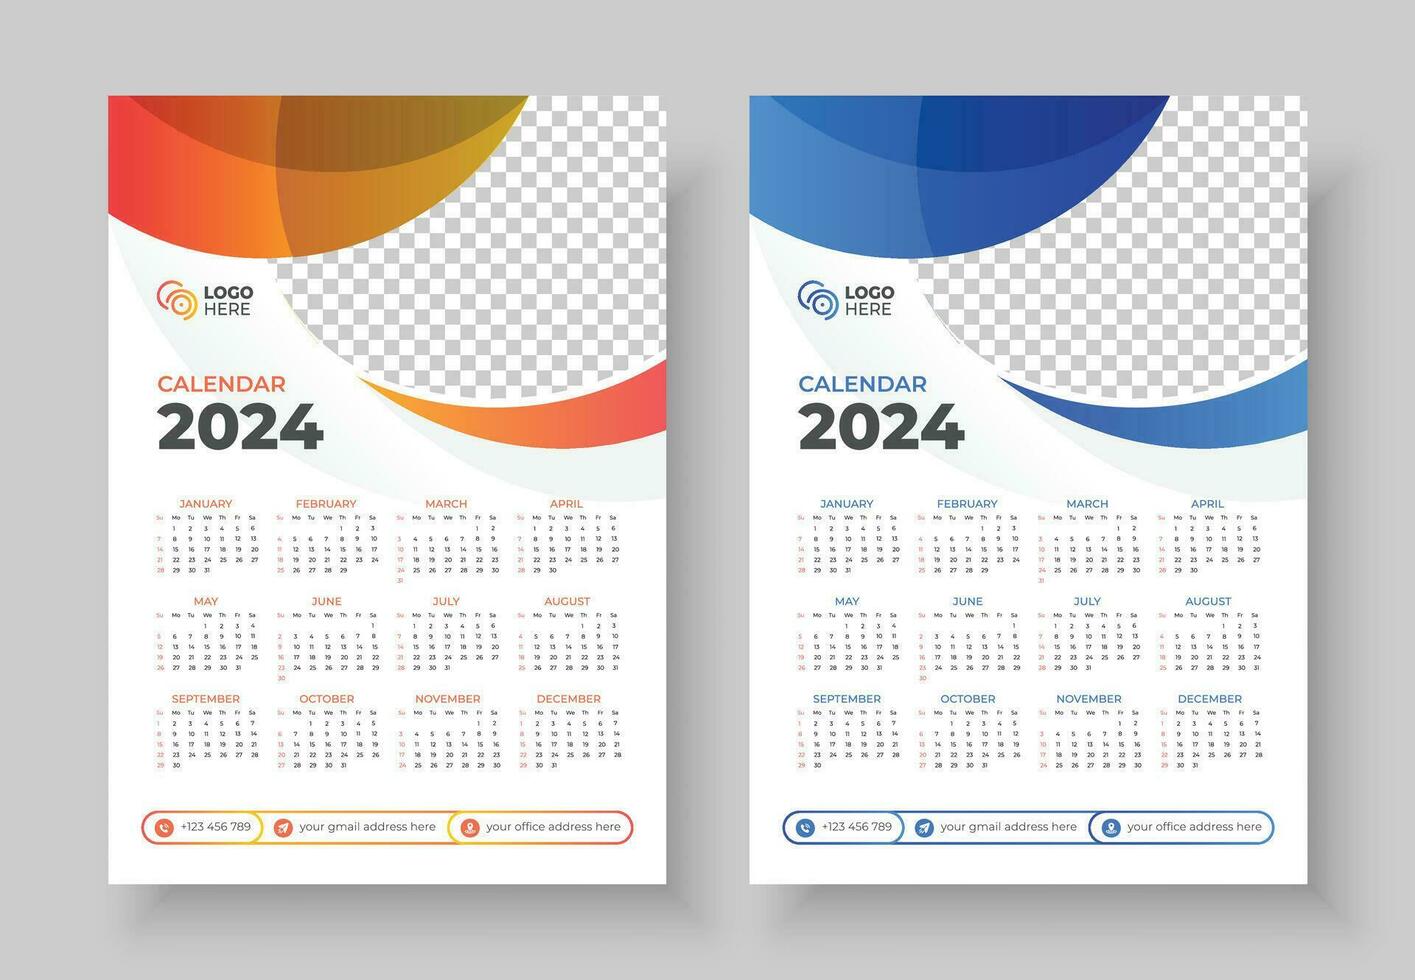 Print Ready One Page wall calendar template design for 2024. Wall Calendar 2024 Template Design. Print Ready One Page wall calendar template design for 2024. Week starts on Sunday vector